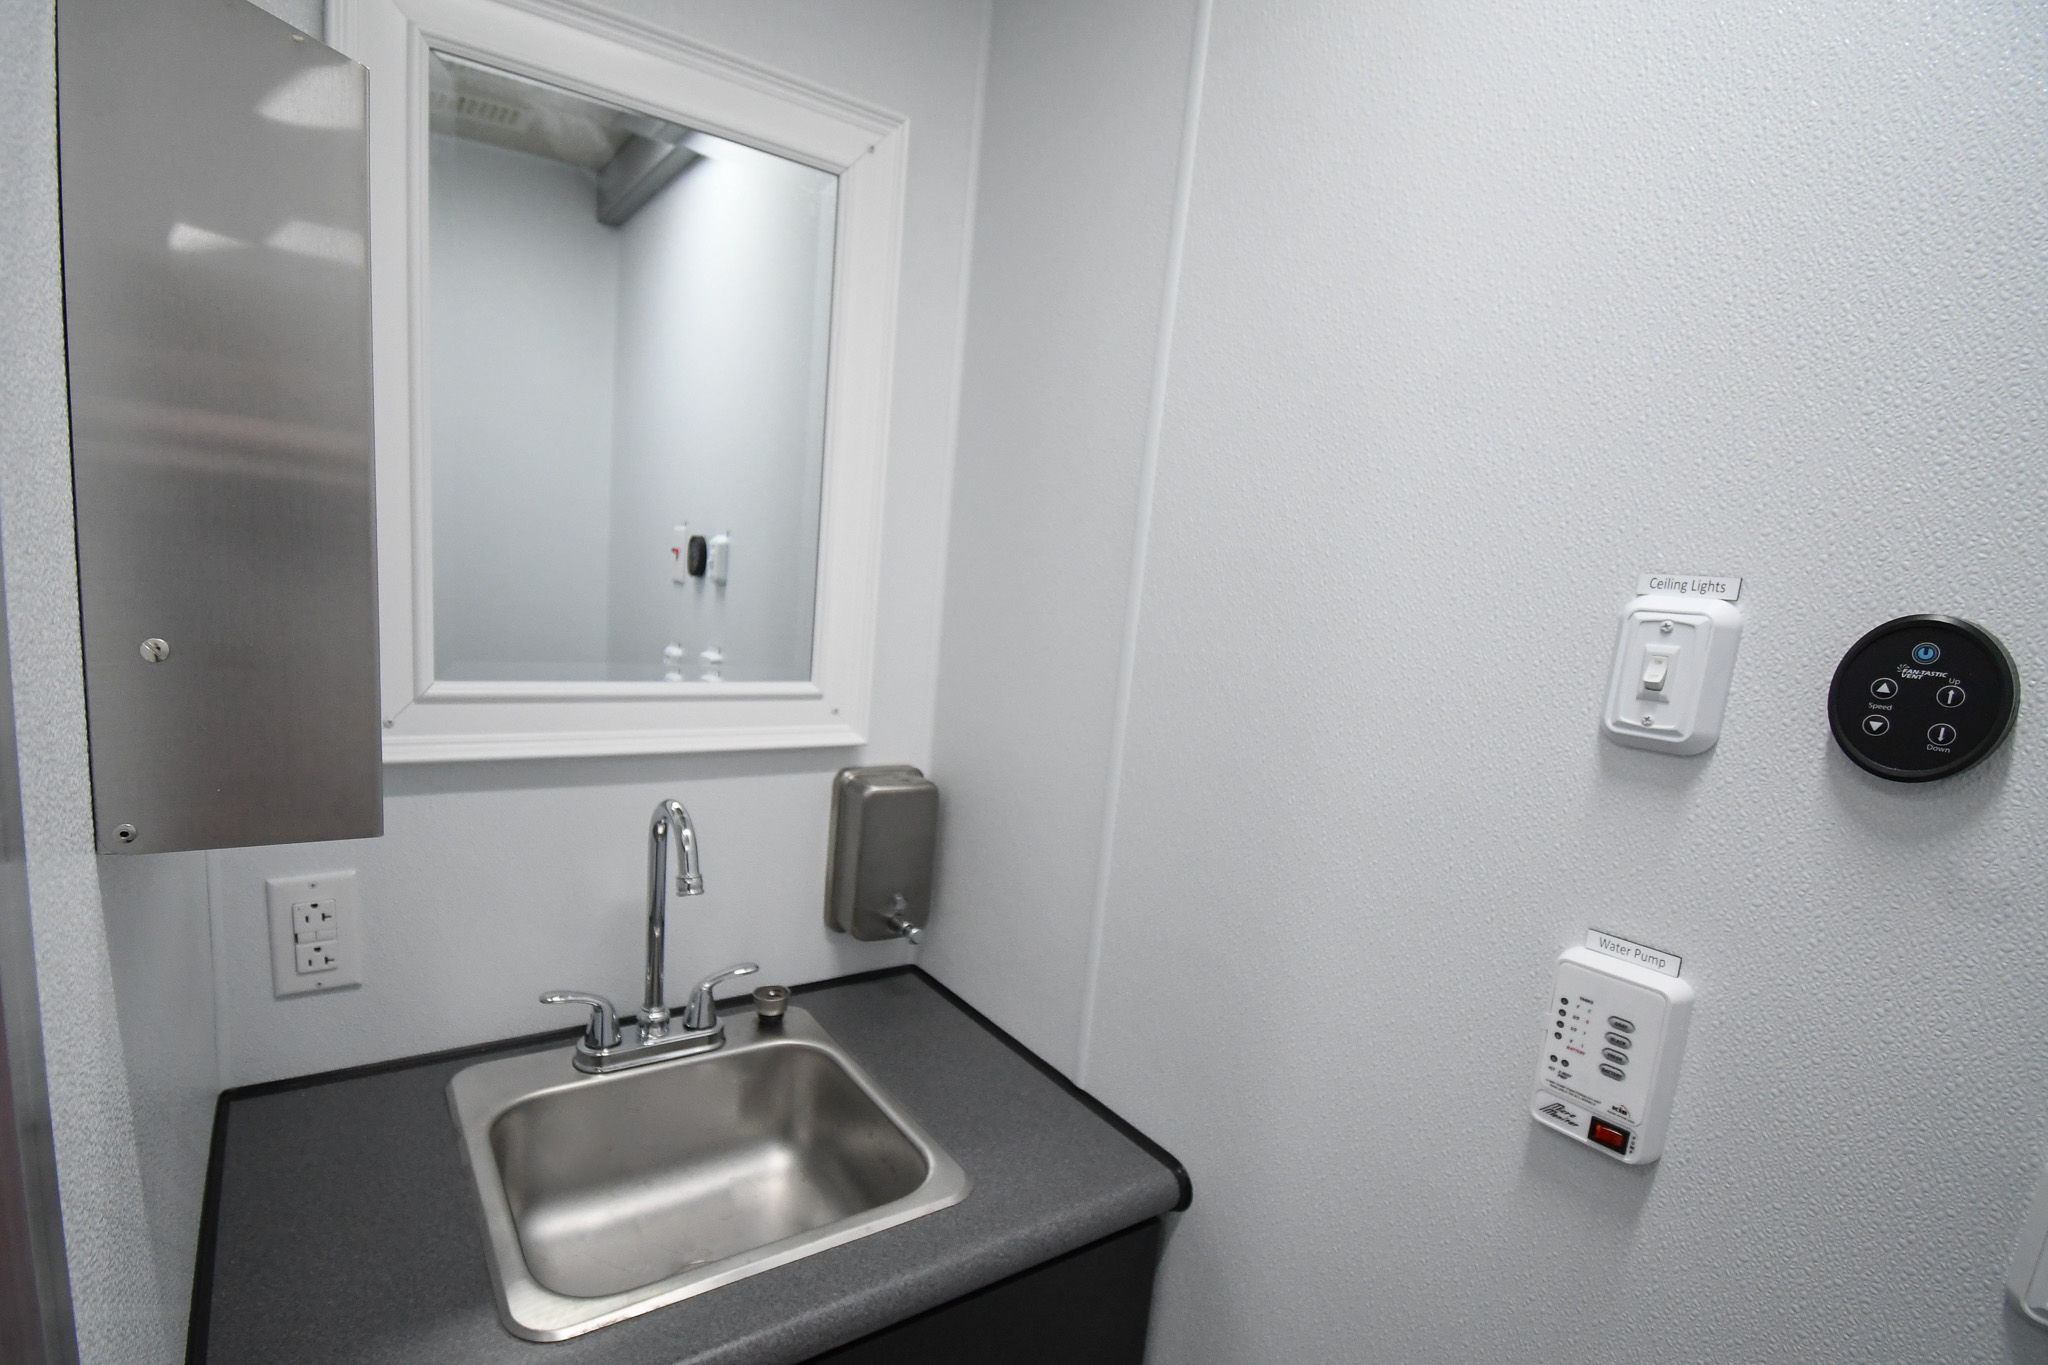 A view of the restroom inside the unit for Susquehanna County, PA.